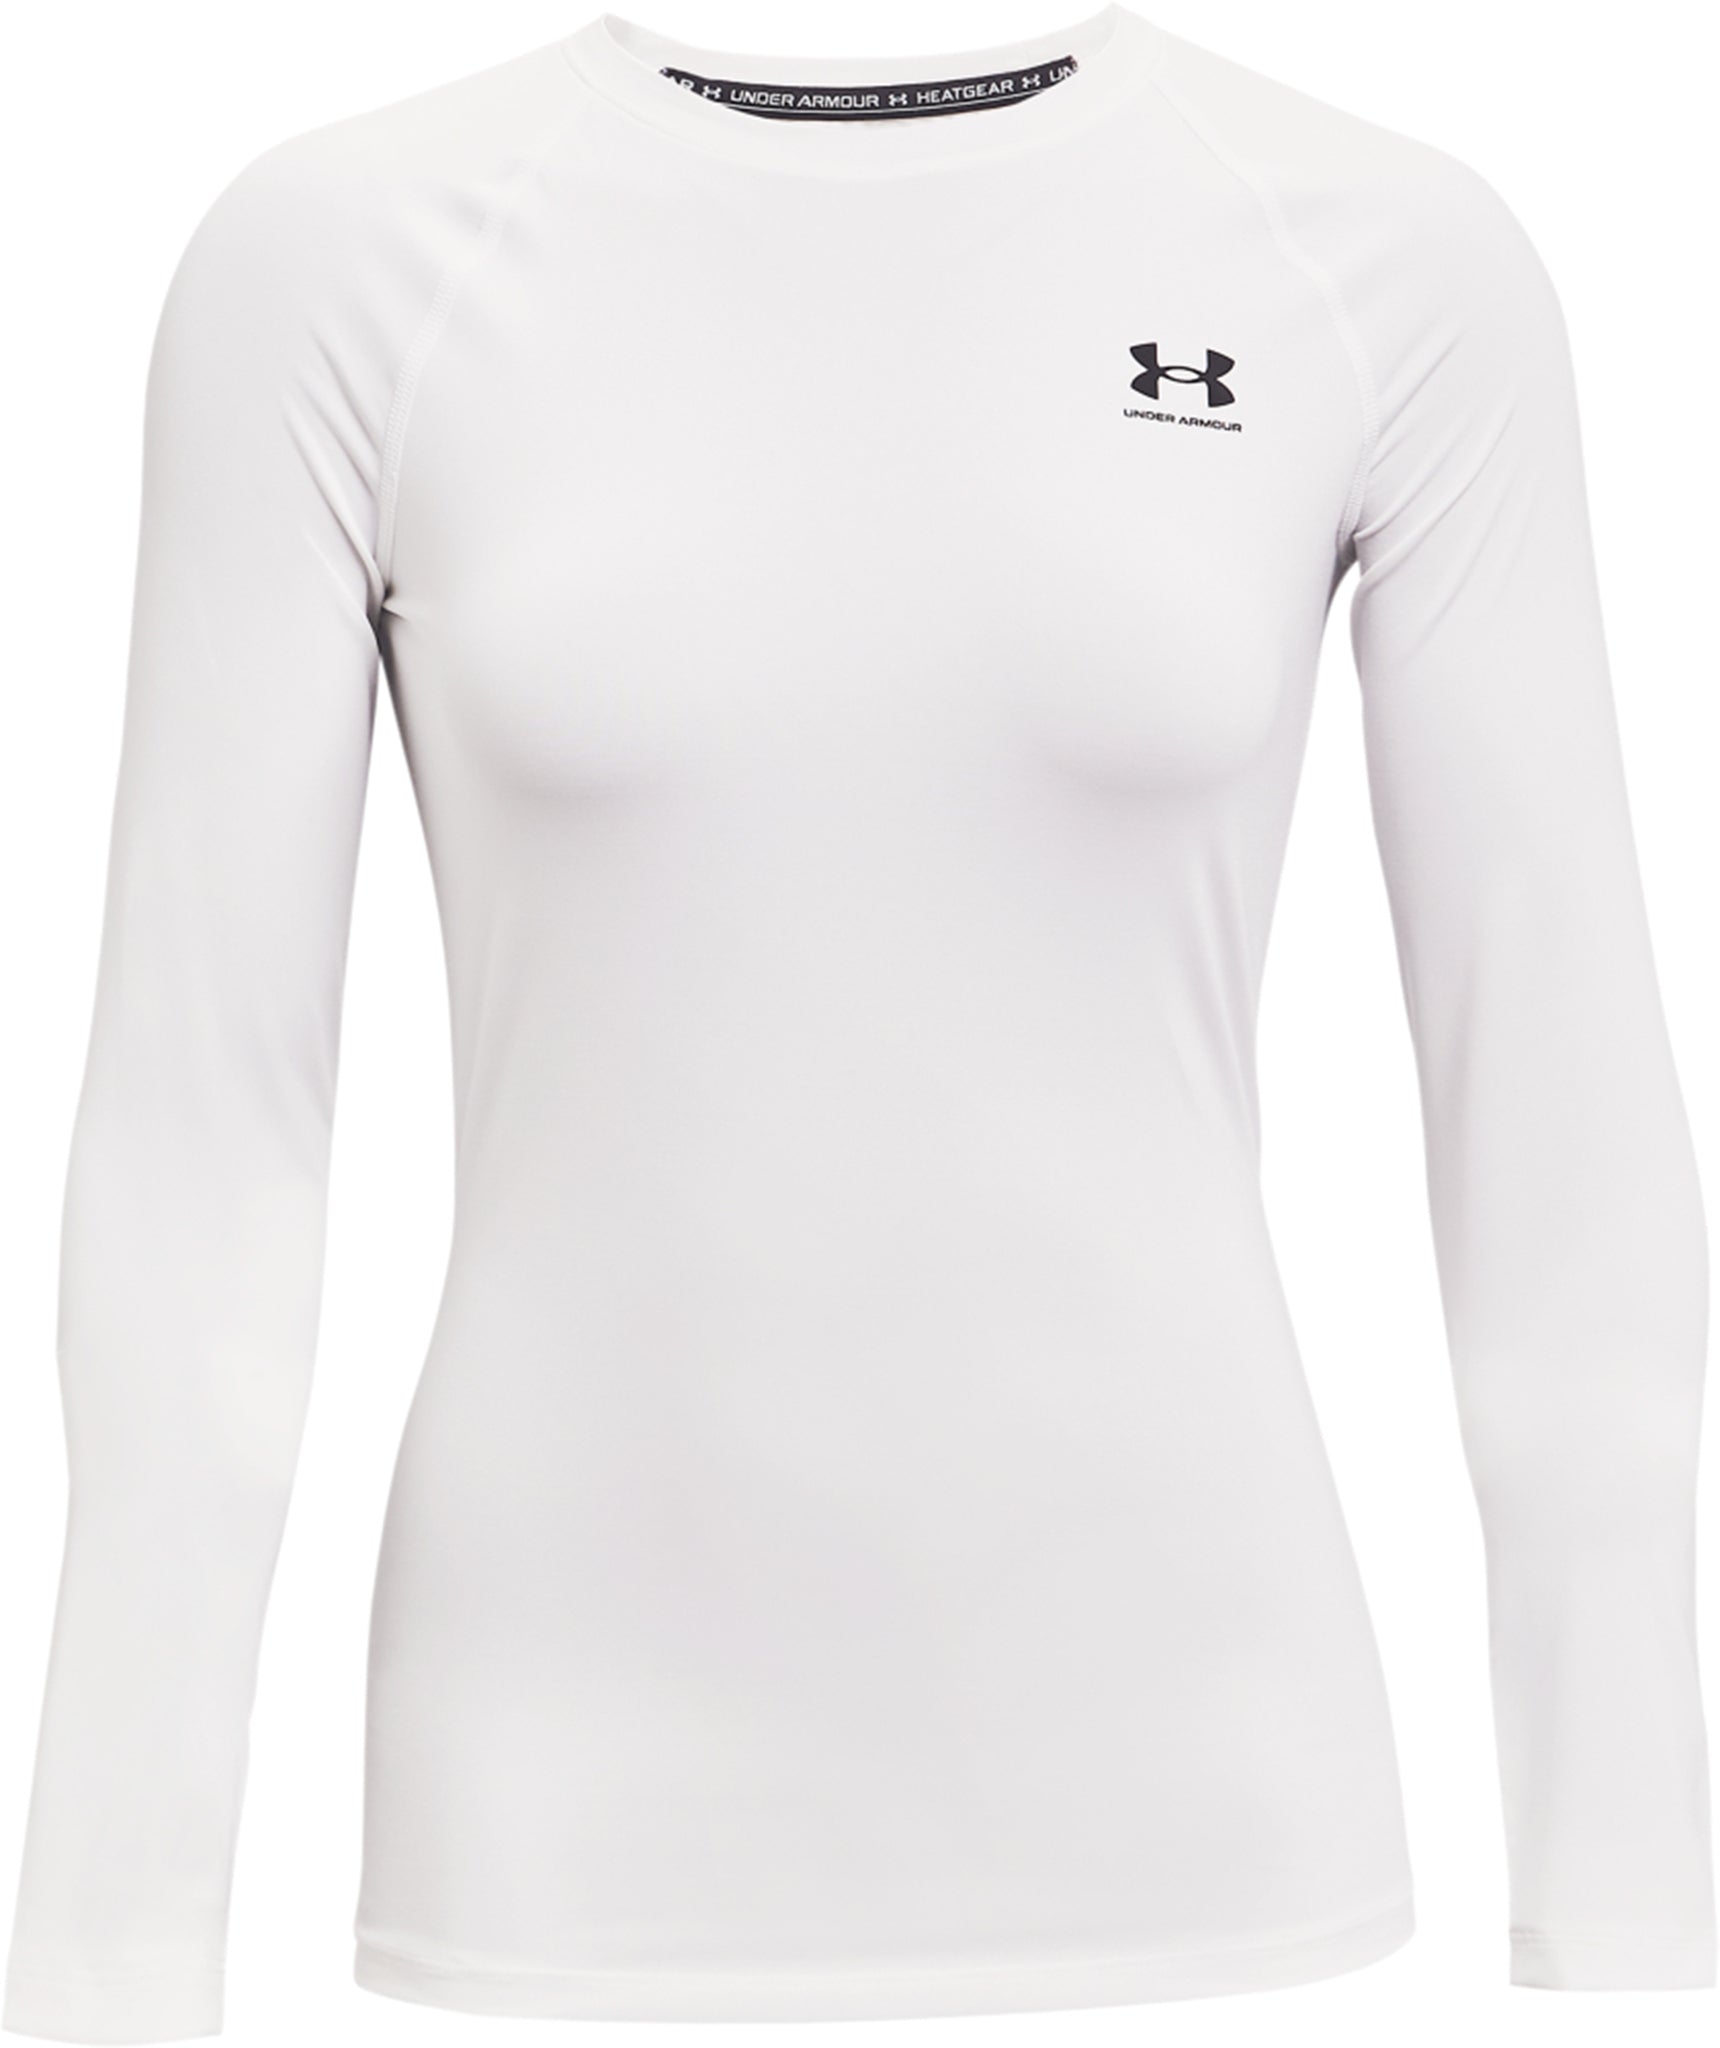 Under Armour Shirt Womens Large Heatgear Long Sleeve Compression Pullover